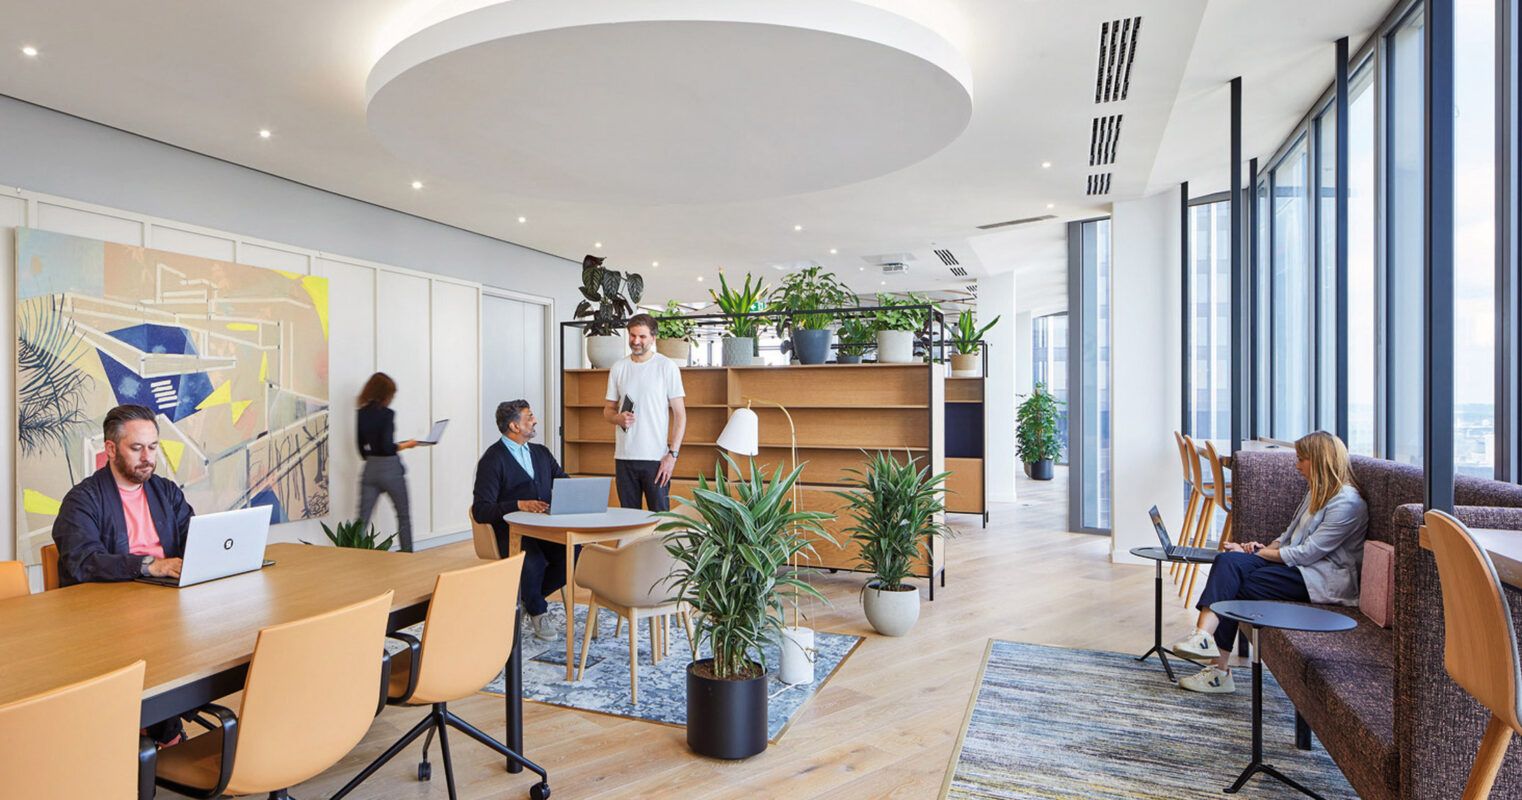 Open-plan office space featuring minimalist wooden desks, ergonomic chairs, and ample natural light from floor-to-ceiling windows. Lush indoor plants provide a refreshing contrast against the sleek, neutral color scheme, reinforcing biophilic design principles.